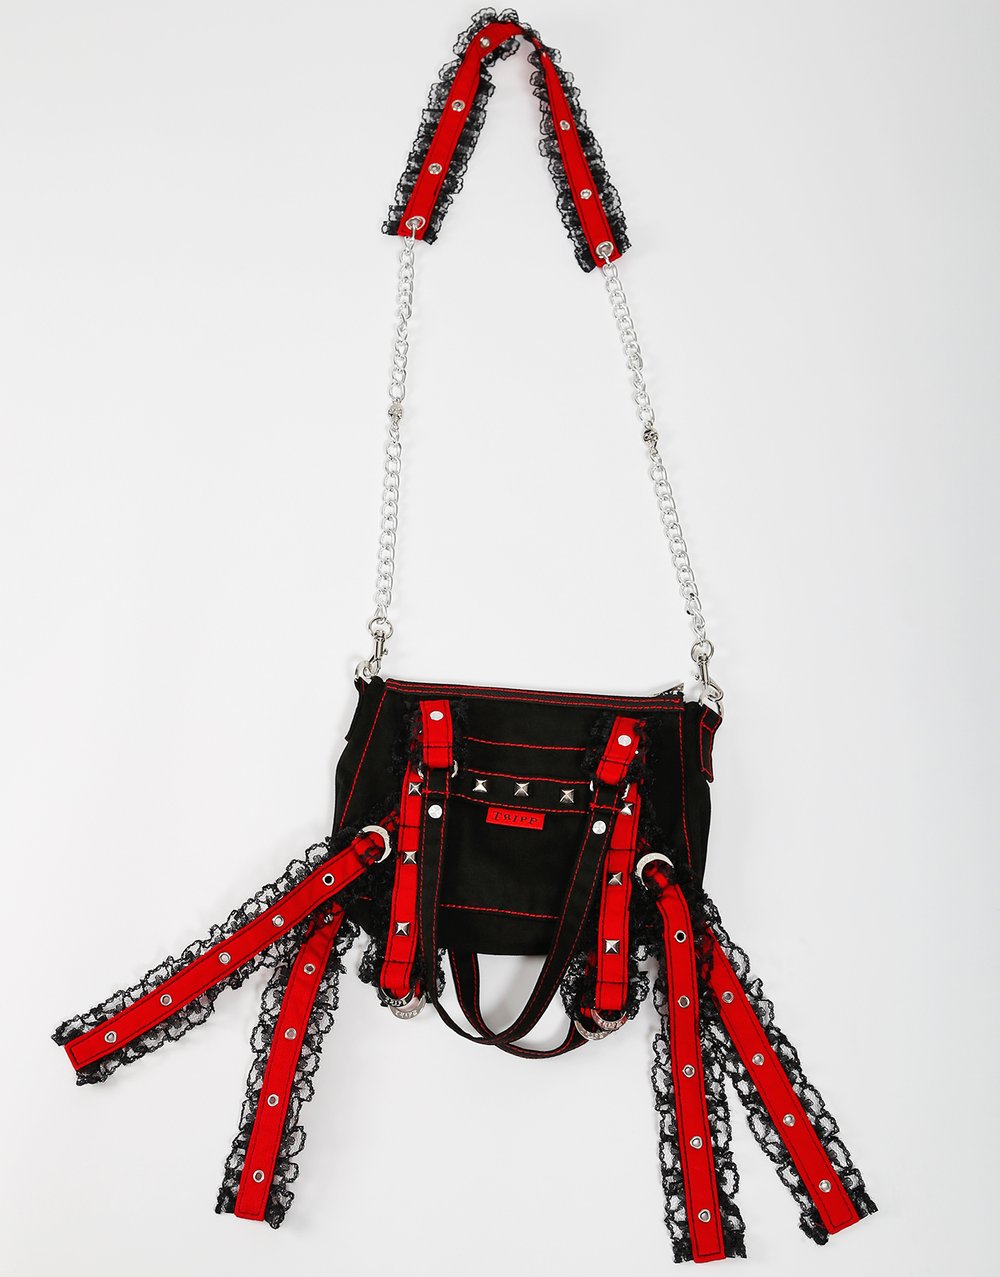 Black and red strappy bondage over the shoulder crossbody bag. Bag has removable chain crossbody strap.